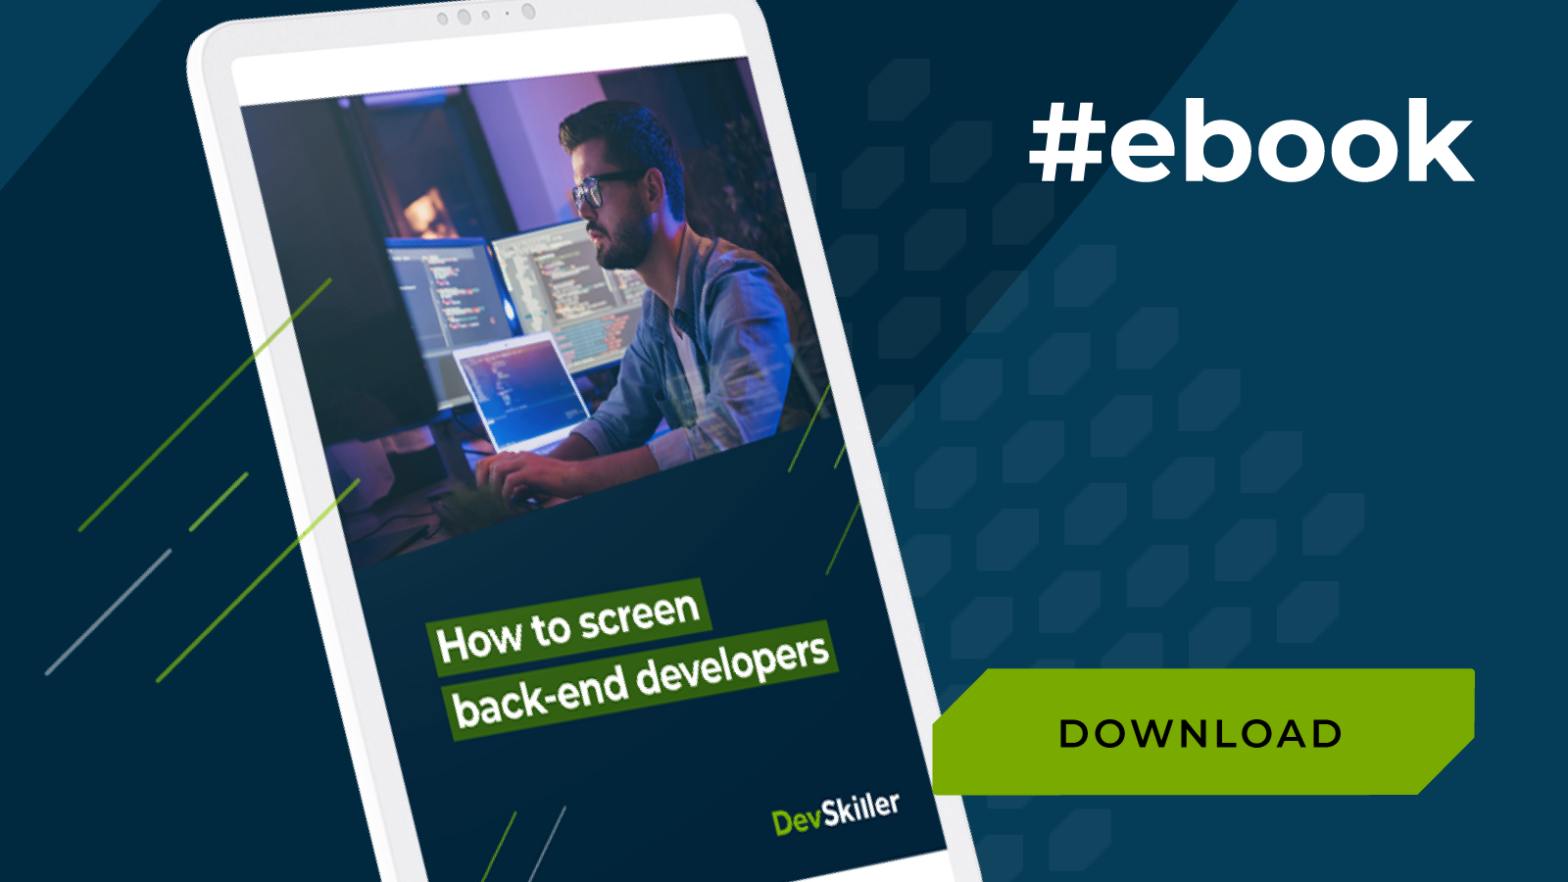 How to screen back-end developers